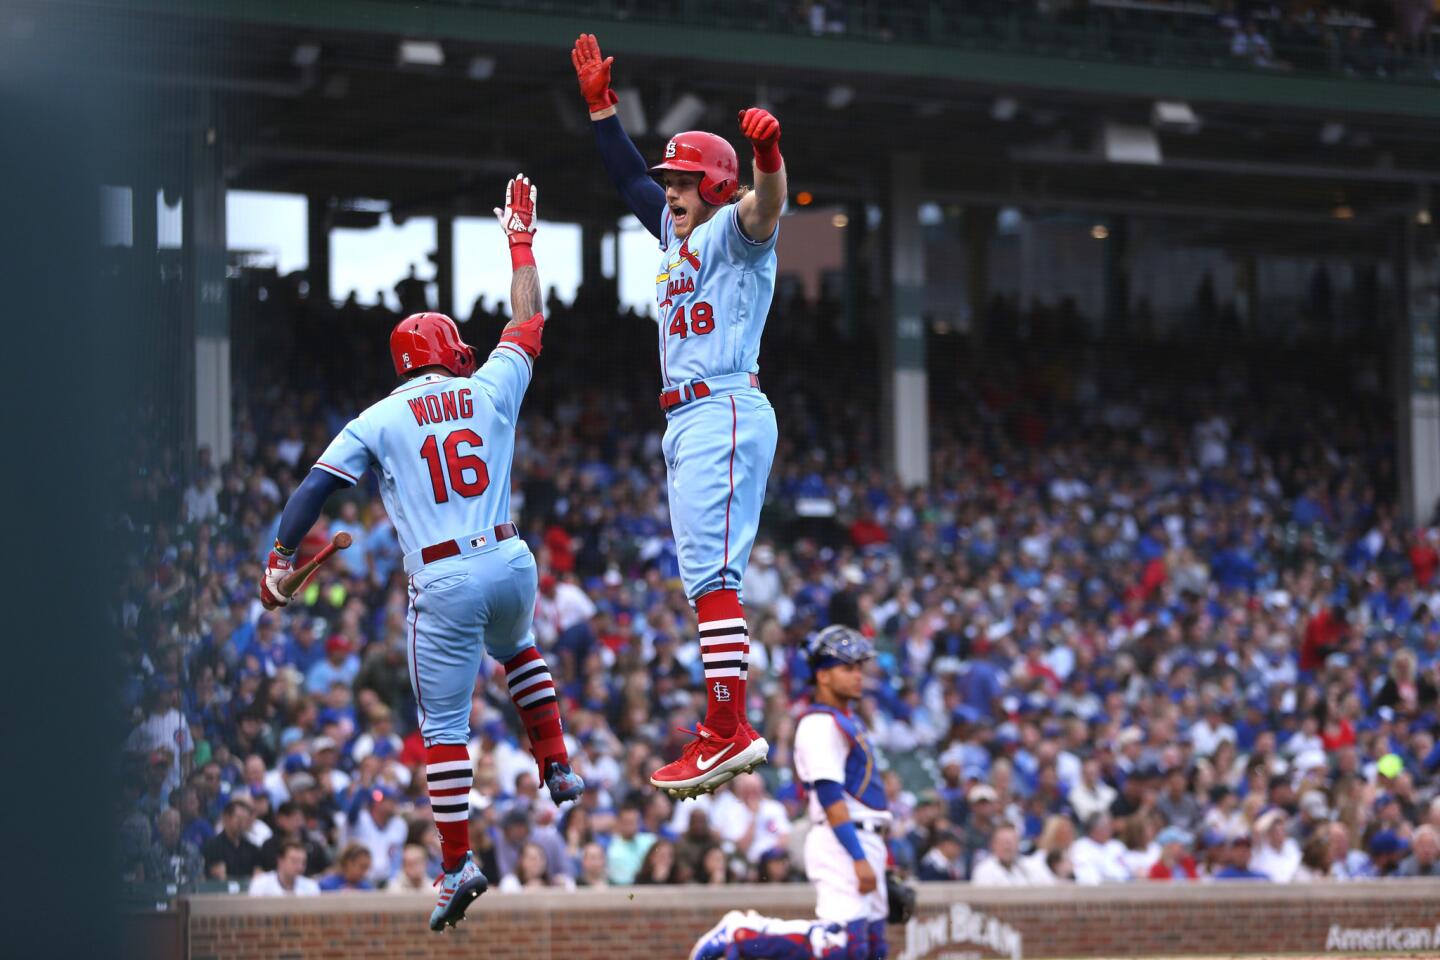 St. Louis Cardinals batter Harrison Bader celebrates with teammate Kolten Wong after Bader hit a solo homer off of Chicago Cubs starting pitcher Jon Lester in the first inning of a game at Wrigley Field in Chicago on June 8, 2019.